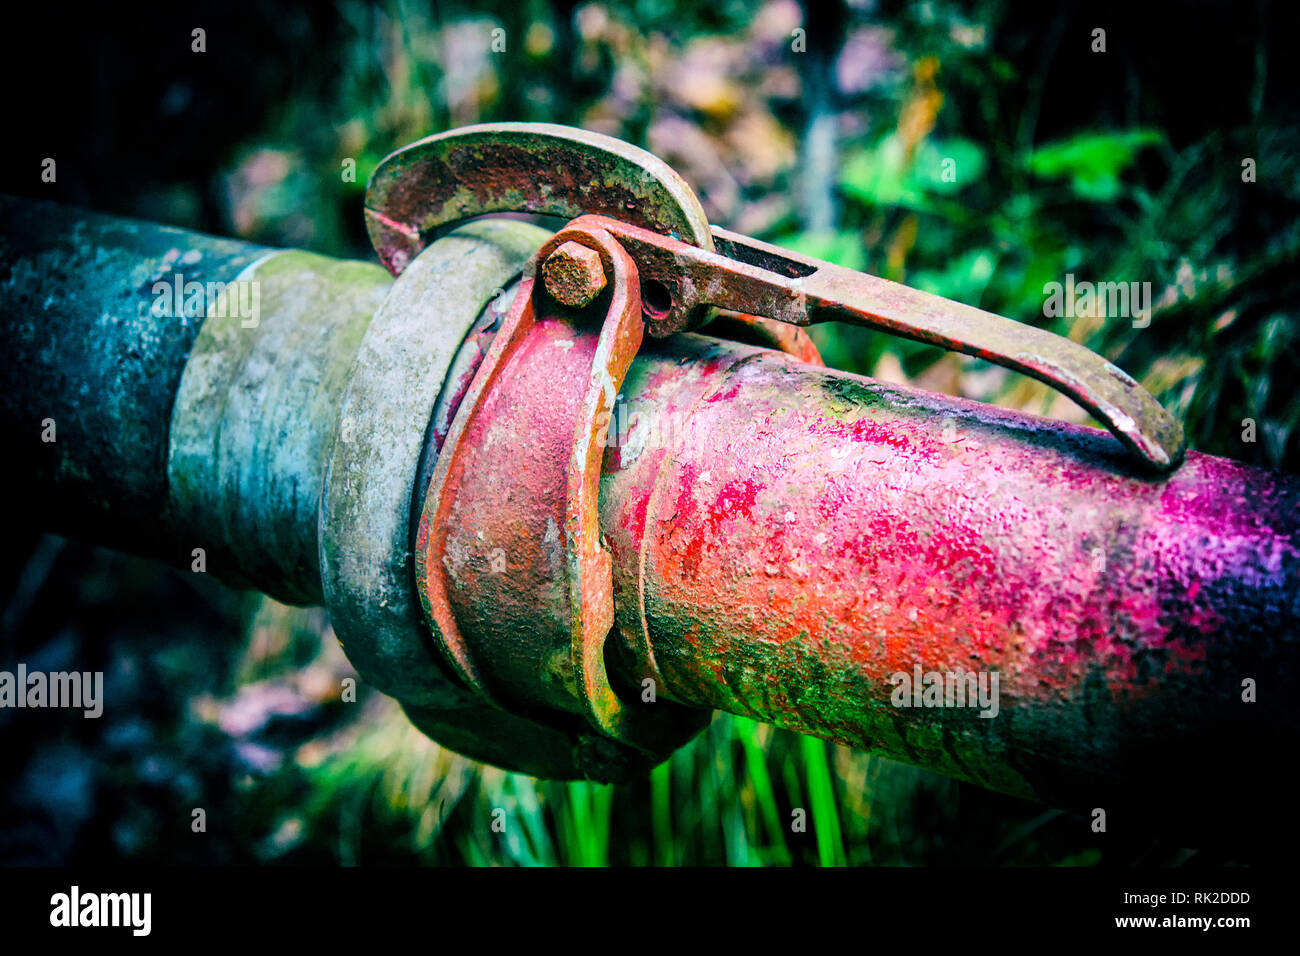 Old colorful metal pipes with clutch on dark background with blurred grass. Coupling of red and blue pipeline close-up. Cohesiveness, fixed connection. Stock Photo